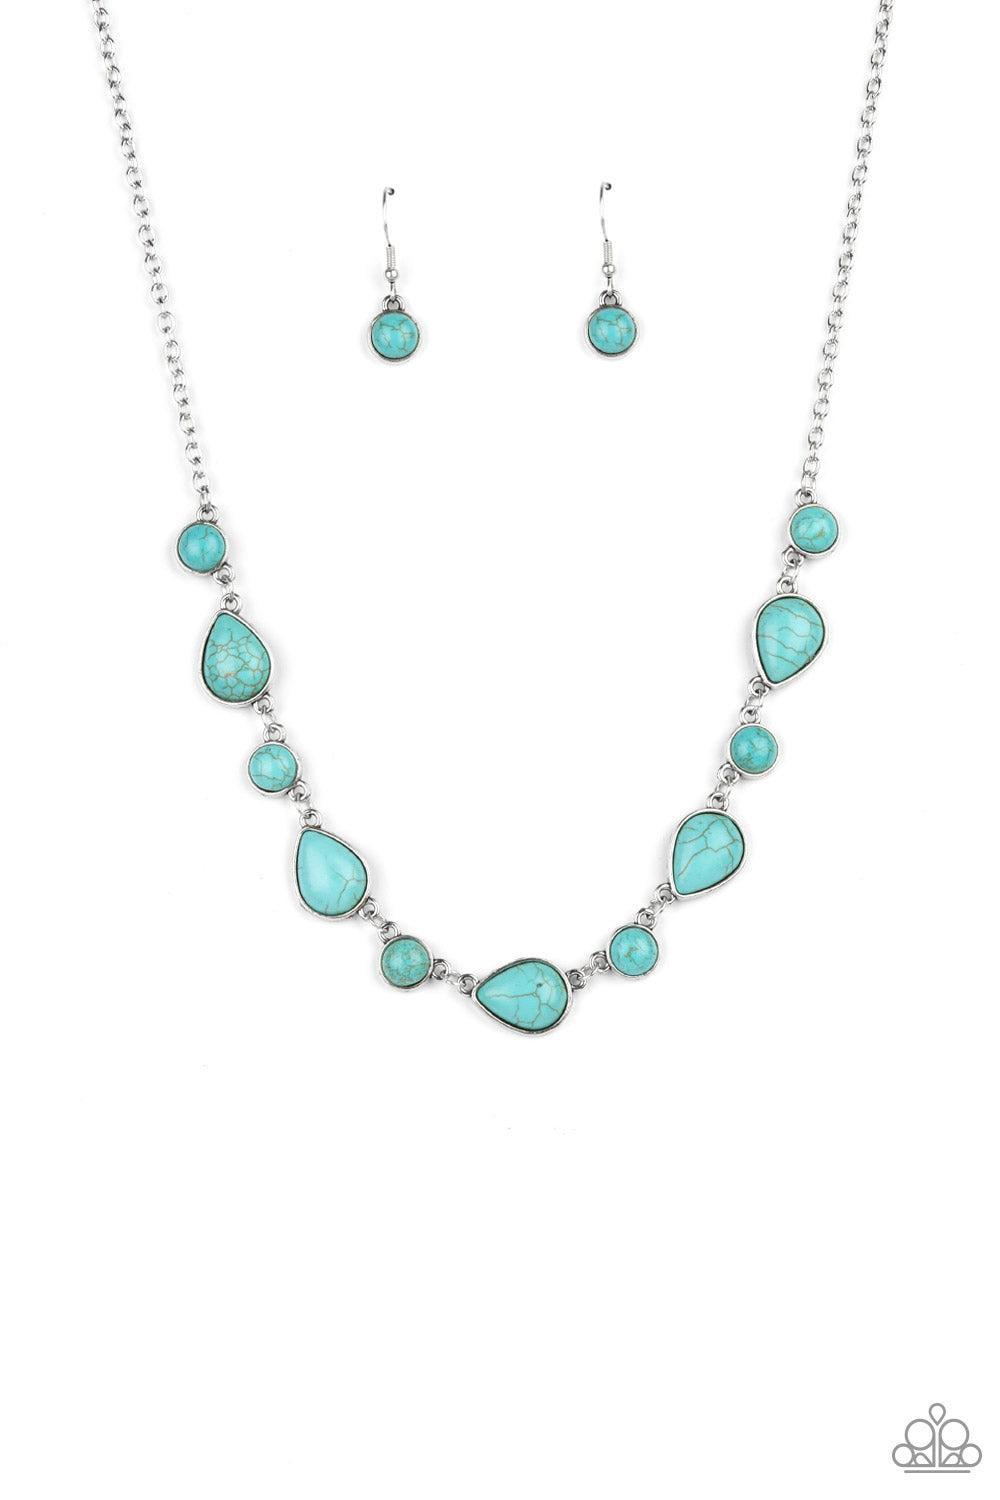 Heavenly Teardrops Turquoise Blue Stone Necklace - Paparazzi Accessories- lightbox - CarasShop.com - $5 Jewelry by Cara Jewels